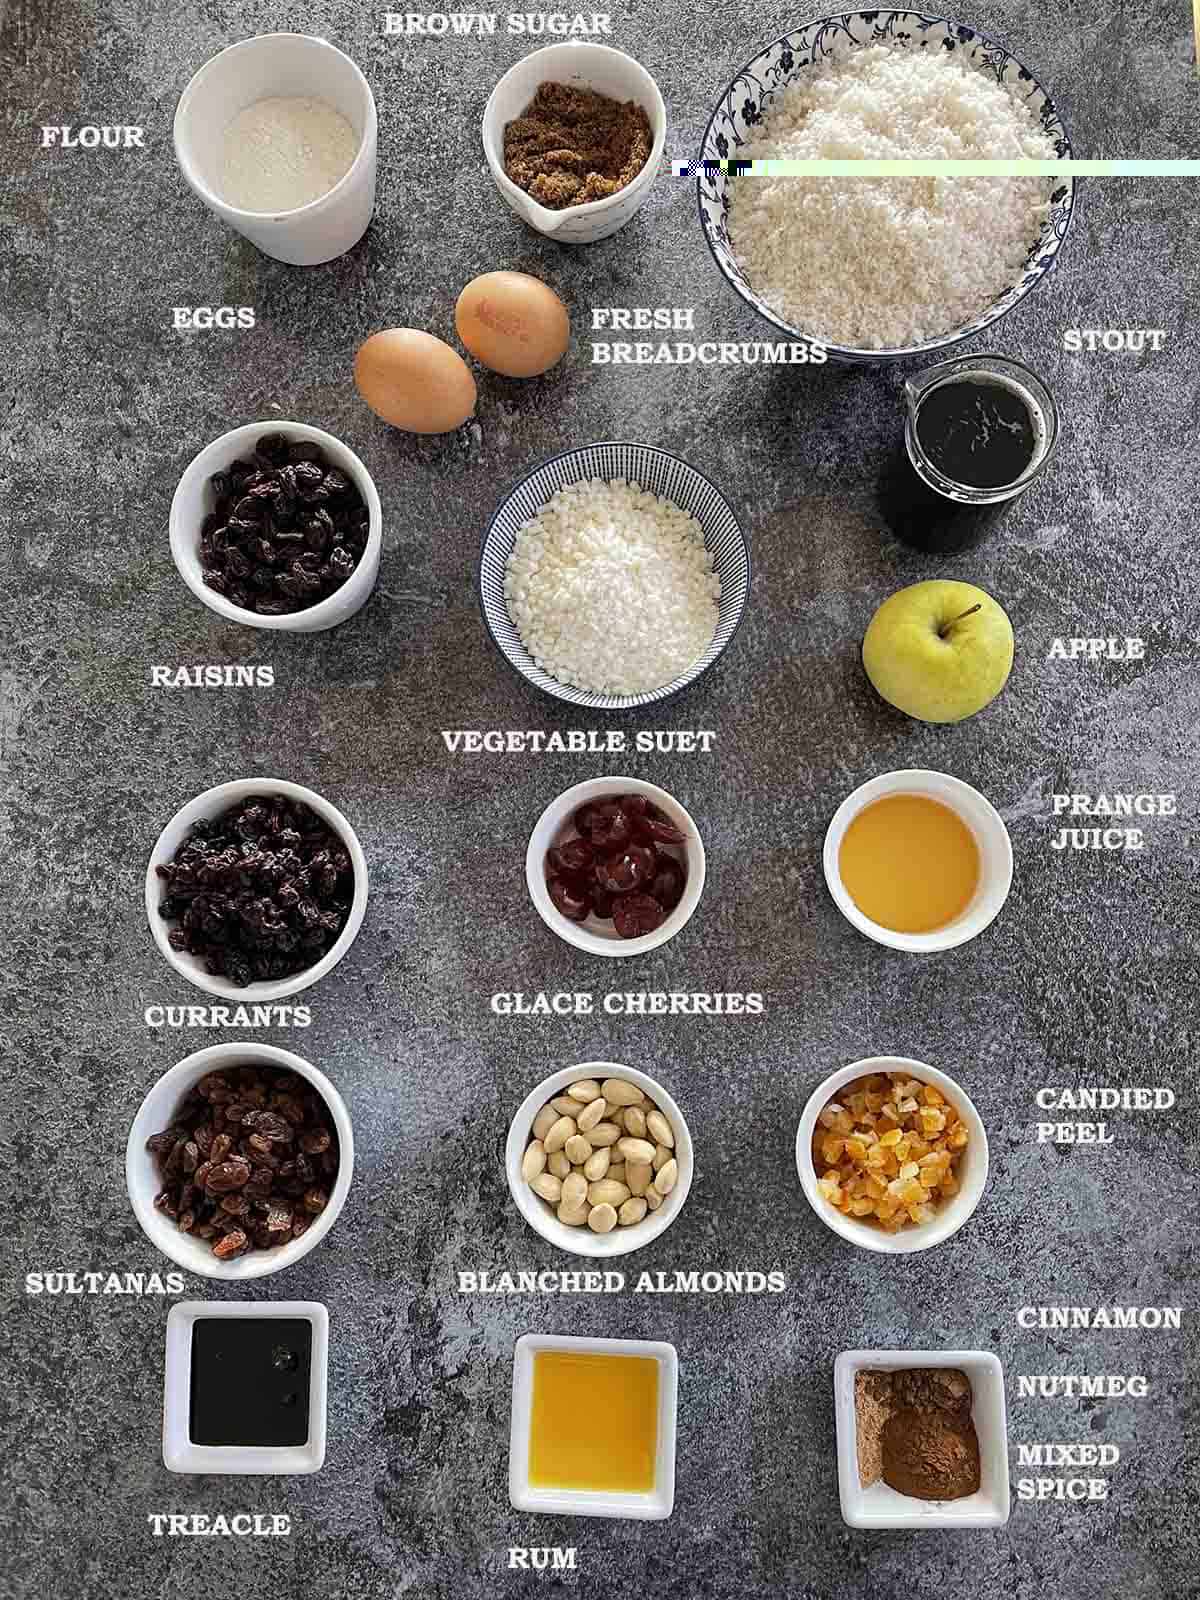 ingredients including dried fruit, egg,s flour, suet and breadcrumbs.